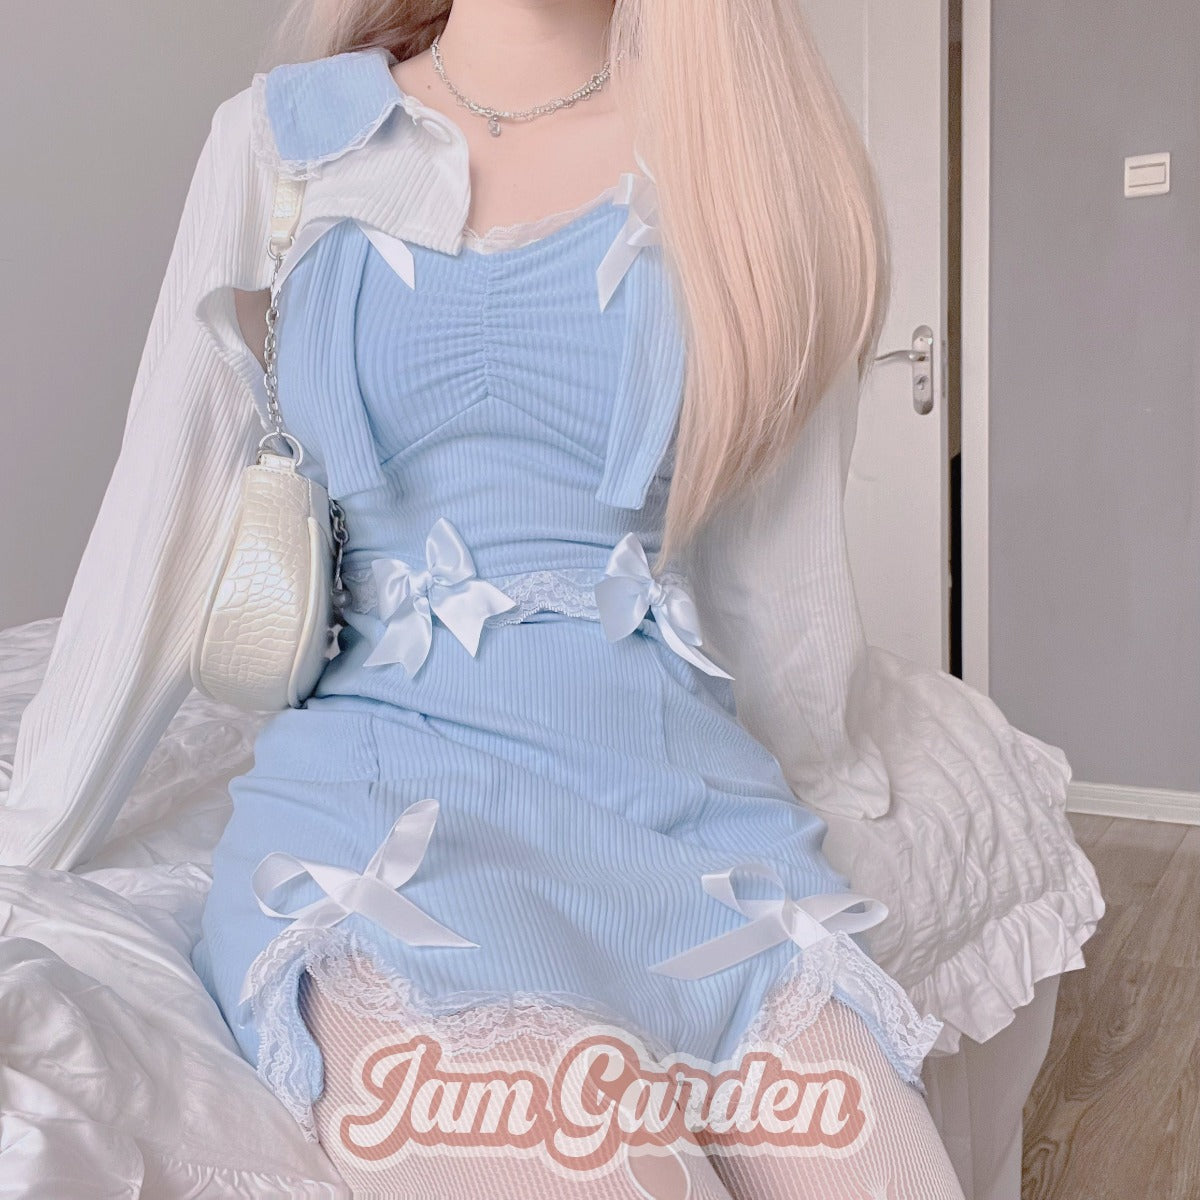 Lace Knitted Camisole Dress Set - Jam Garden